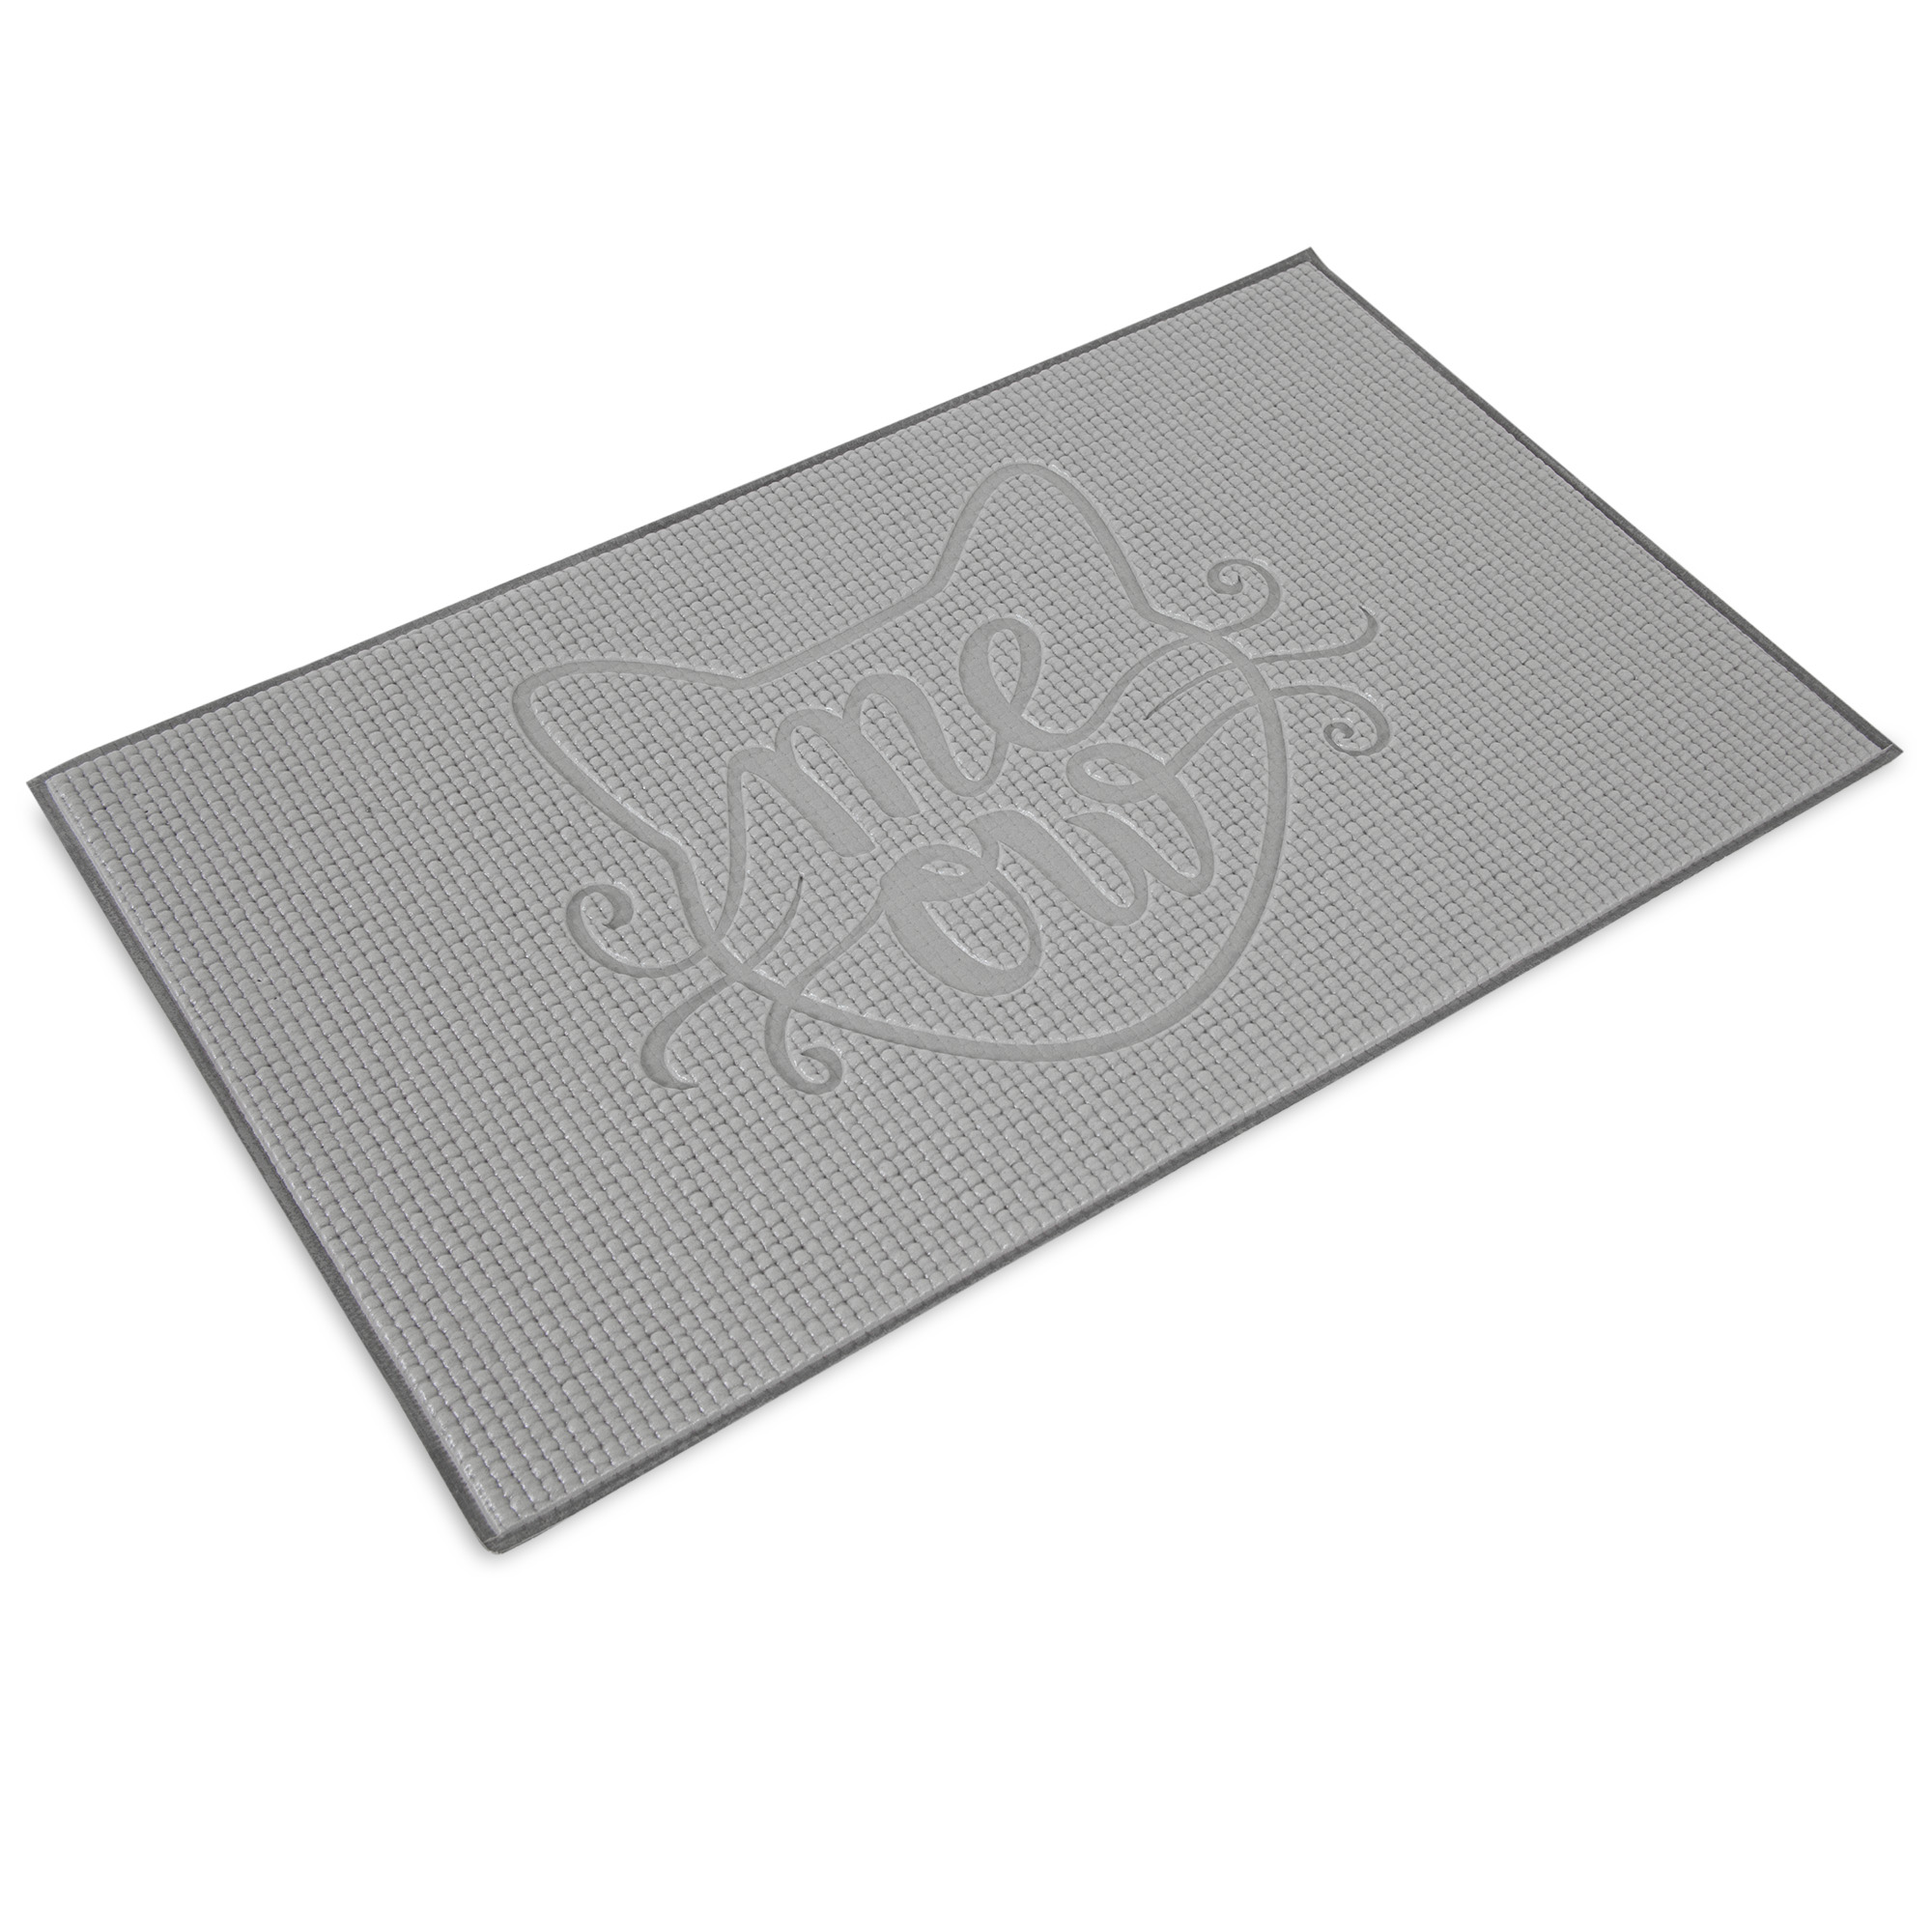 Aspen Pet Foam Pet Bowl Mat for Cats, 19 inches x 11.5 inches - image 3 of 7